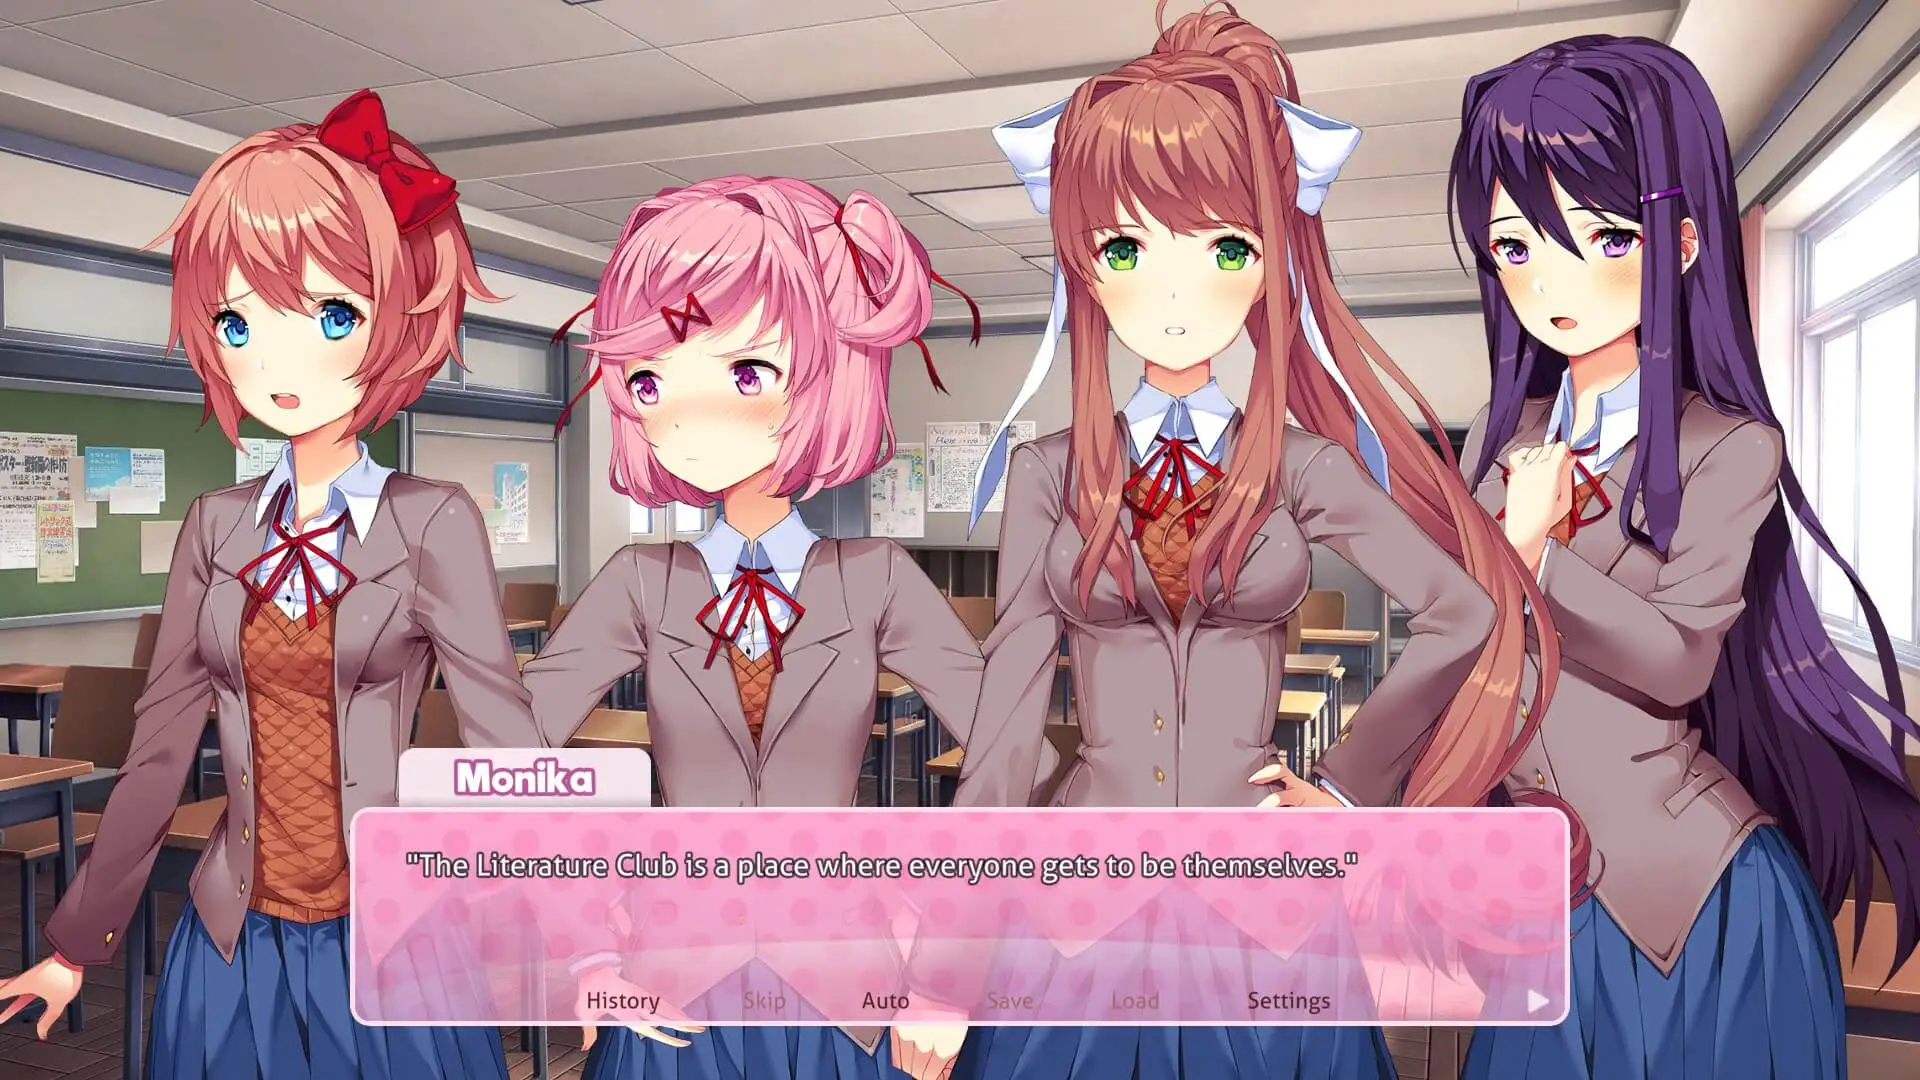 CREATING MONIKA'S BIRTHDAY by CHANGING the FILES